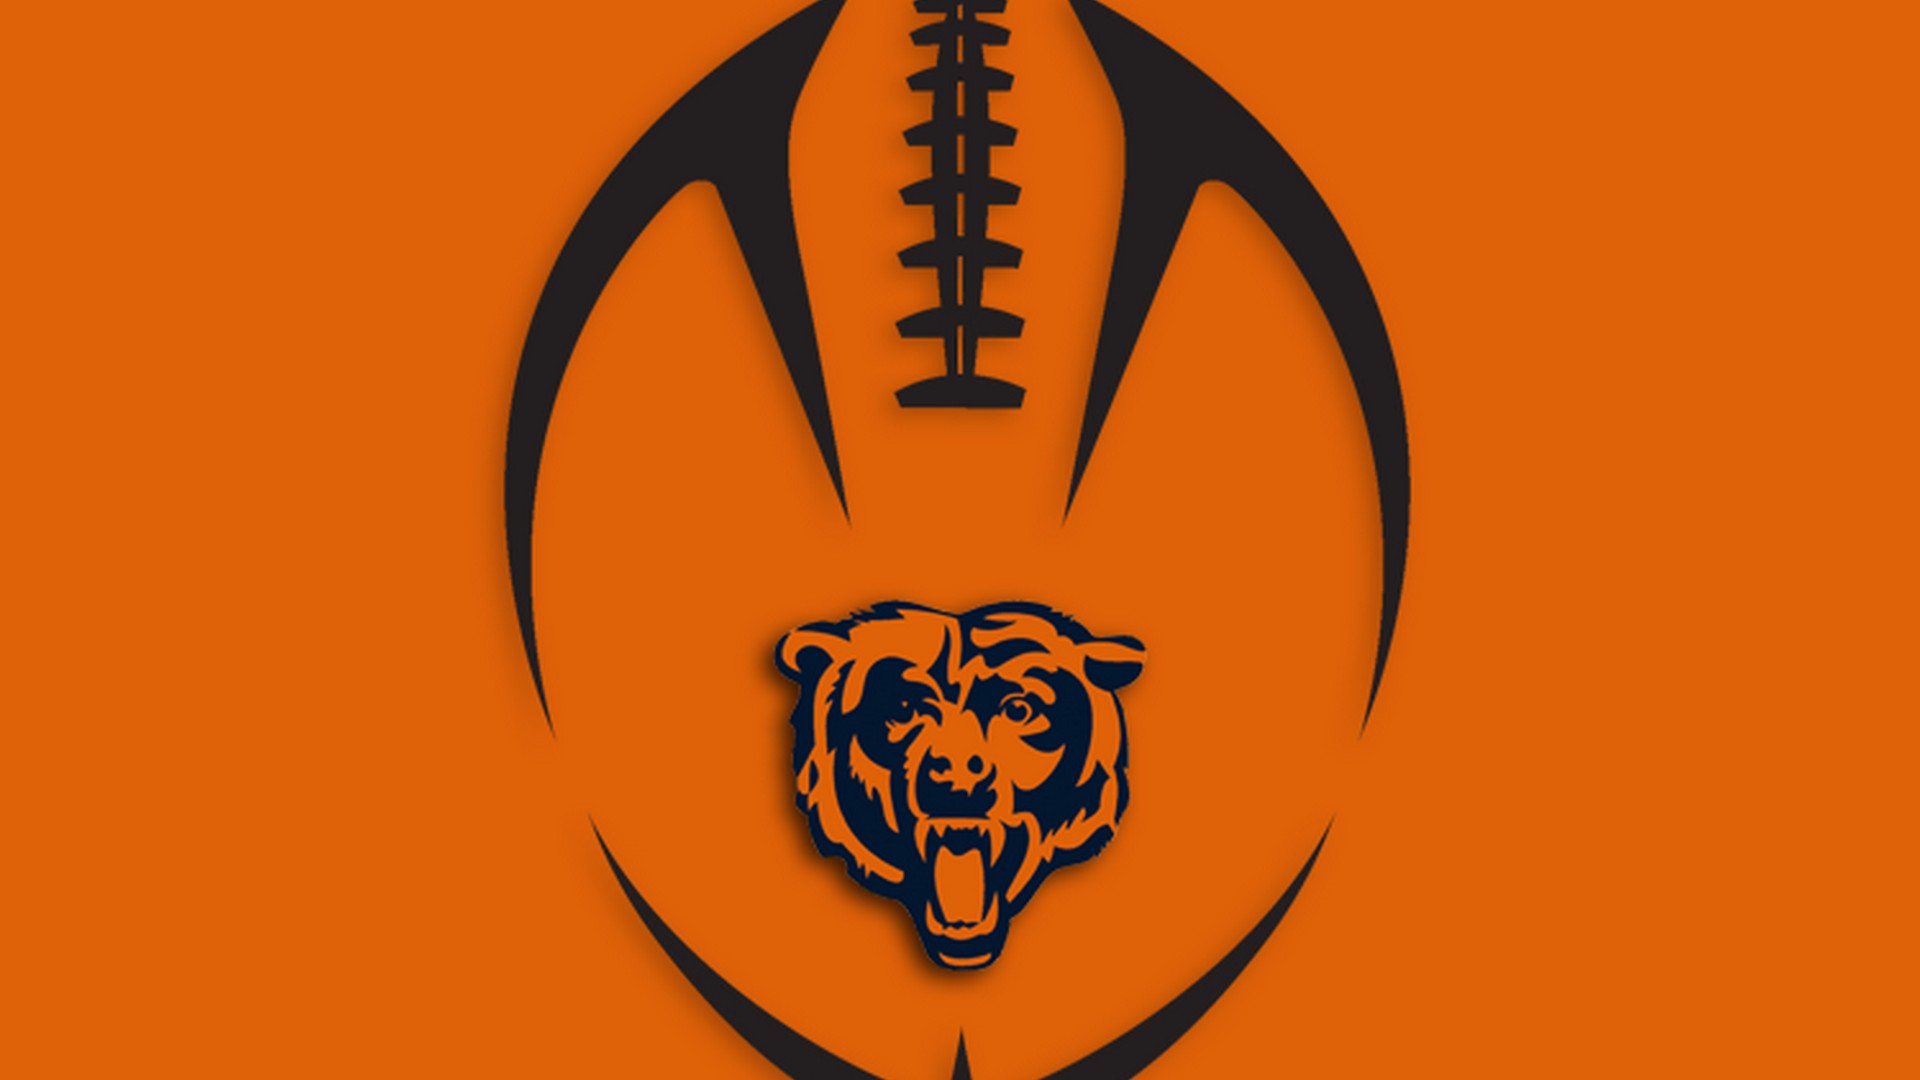 Wallpapers HD Chicago Bears With Resolution 1920X1080